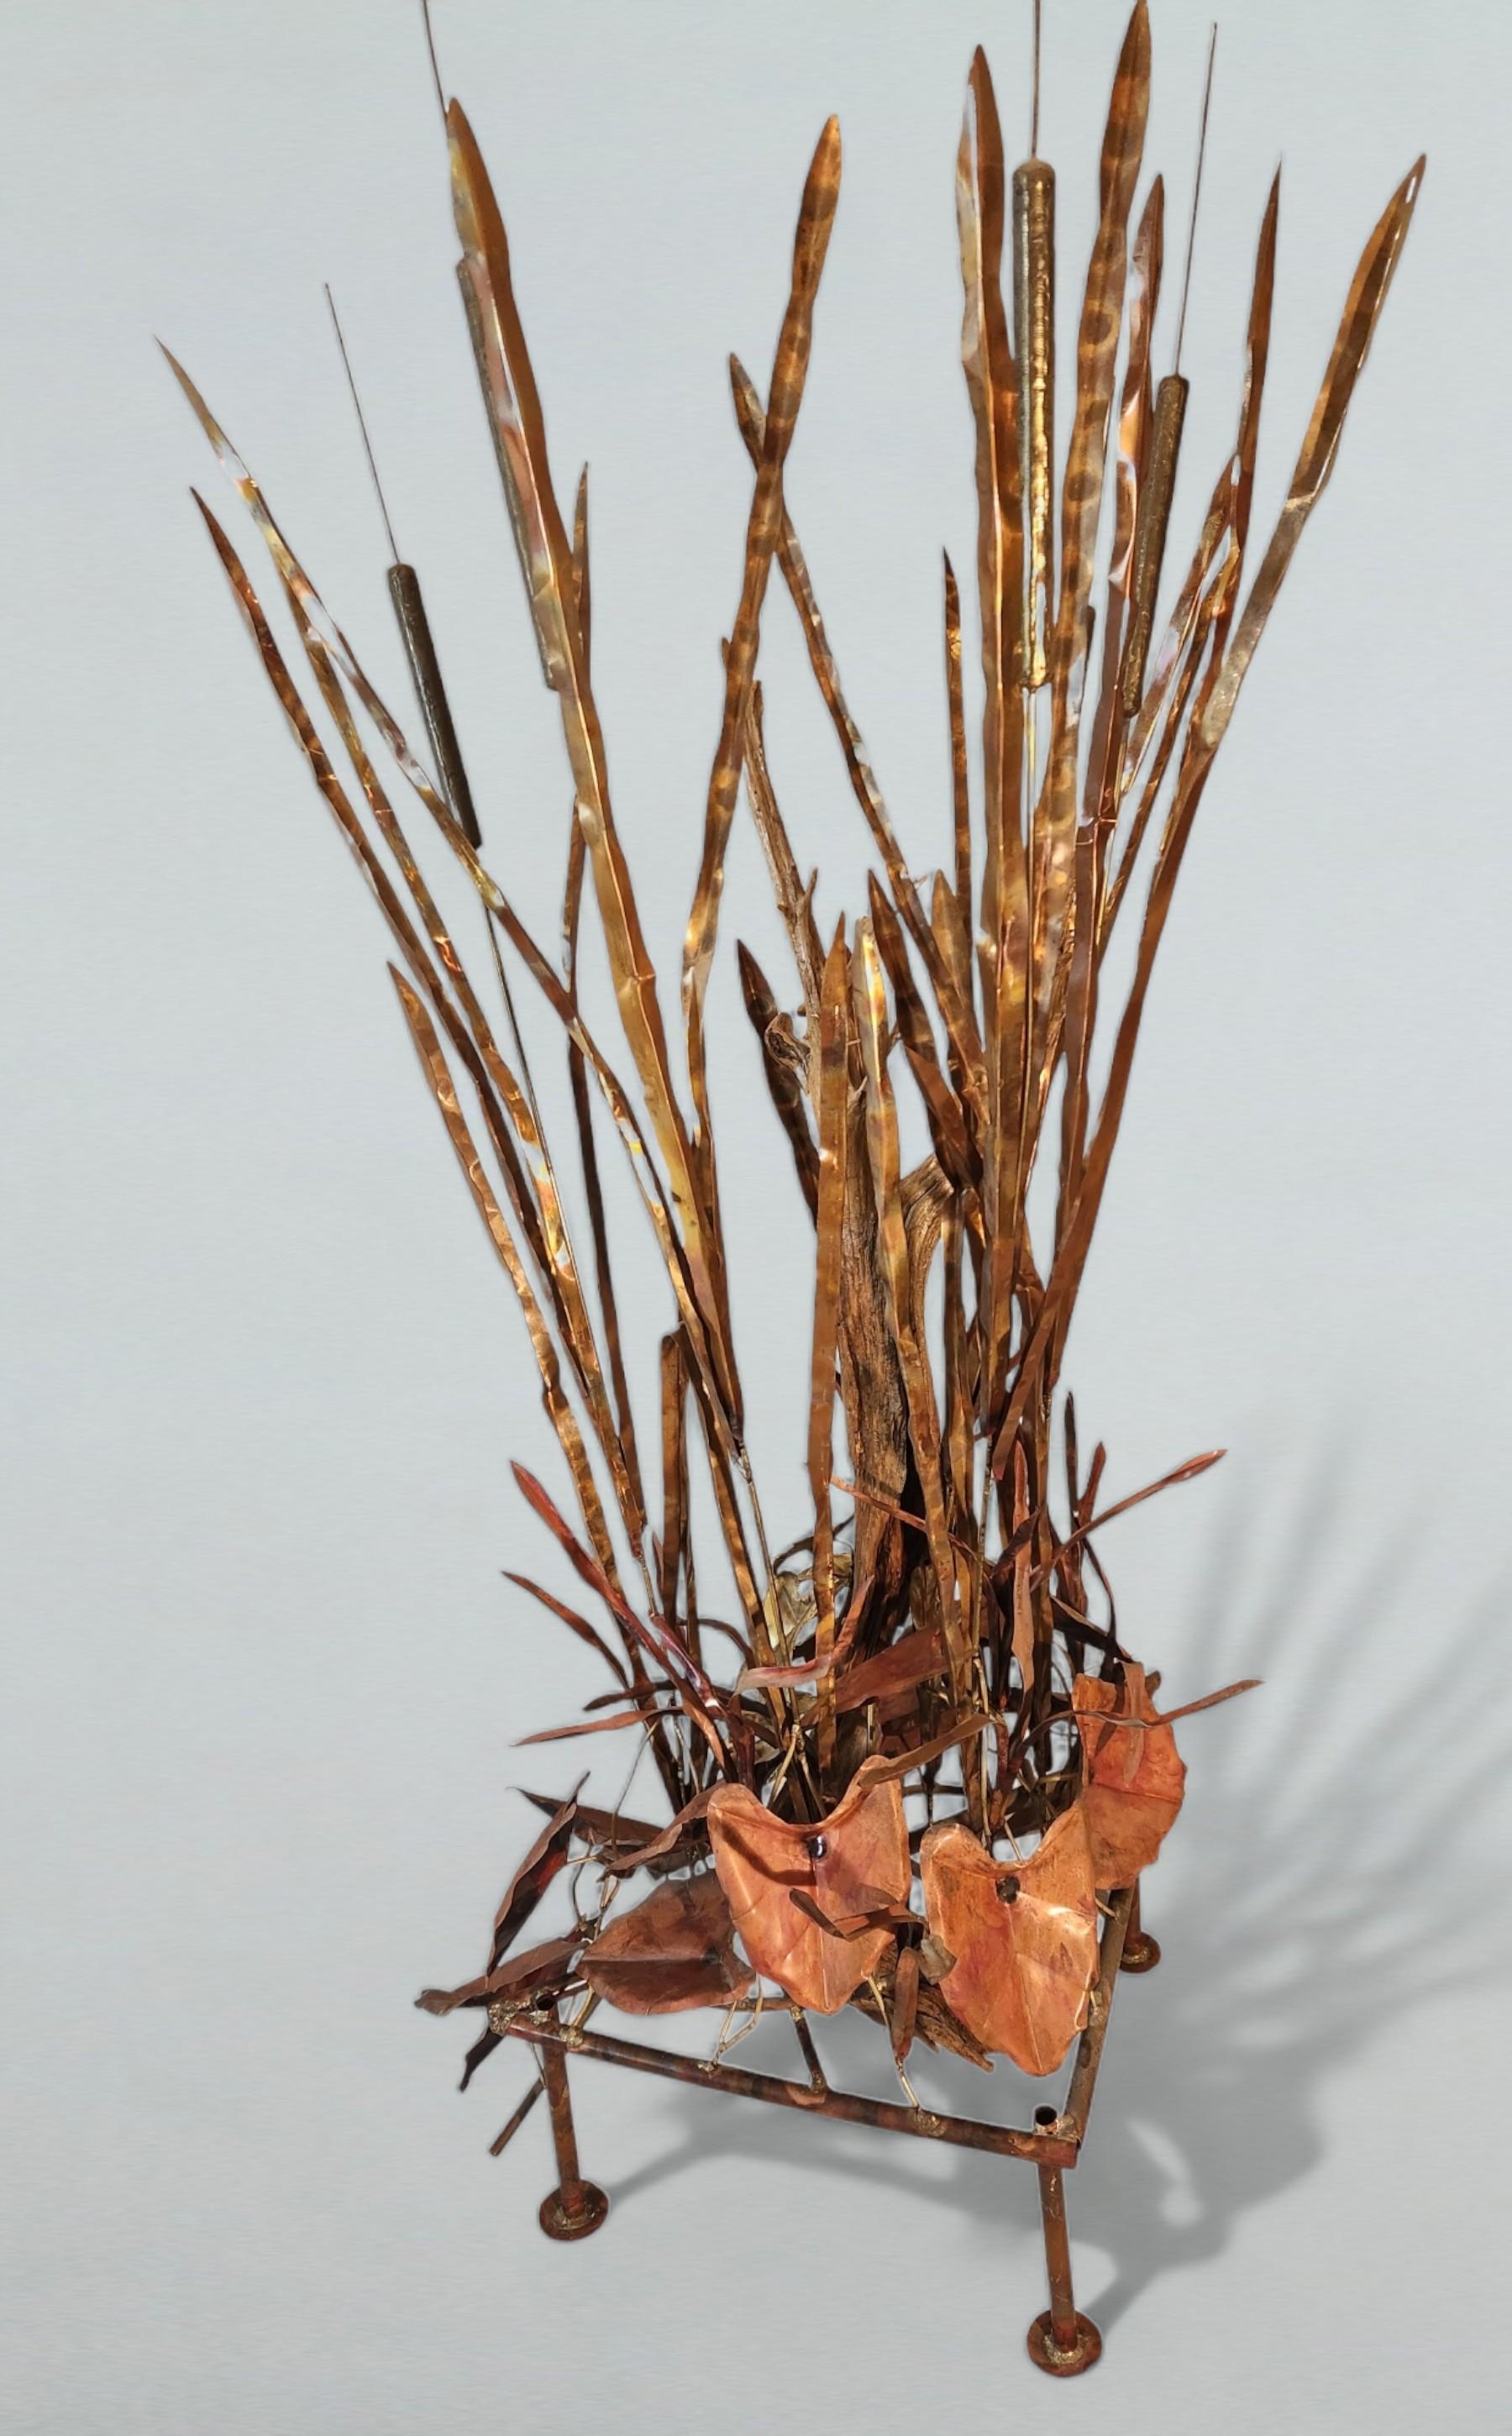 A freestanding sculpture over six feet in height in the style of Curtis Jere from the 1970s.
An interesting marsh vignette of copper and brass seagrass with cast bronze cattails and assorted leaves with a driftwood limb on a copper pipe